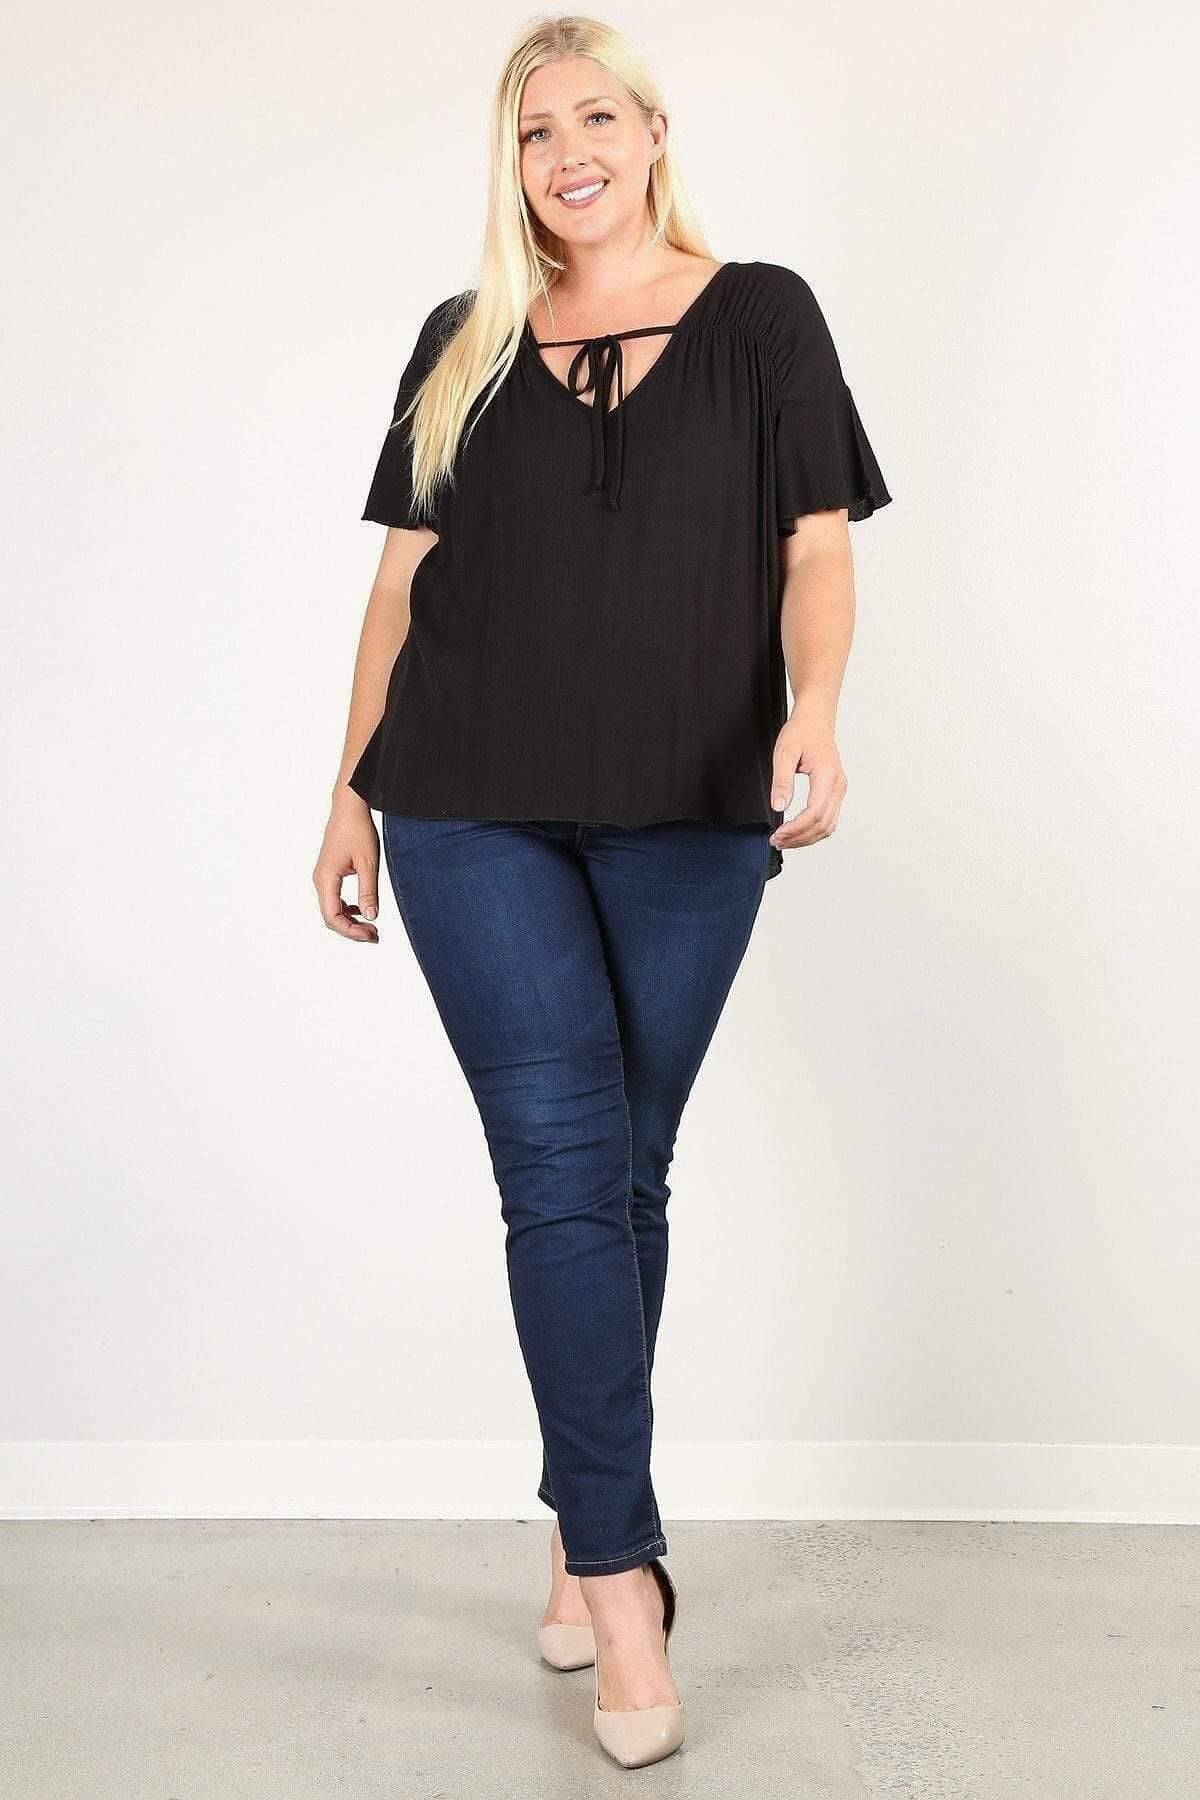 Black 3/4 Ruched Sleeve Plus Top - Shopping Therapy, LLC Top